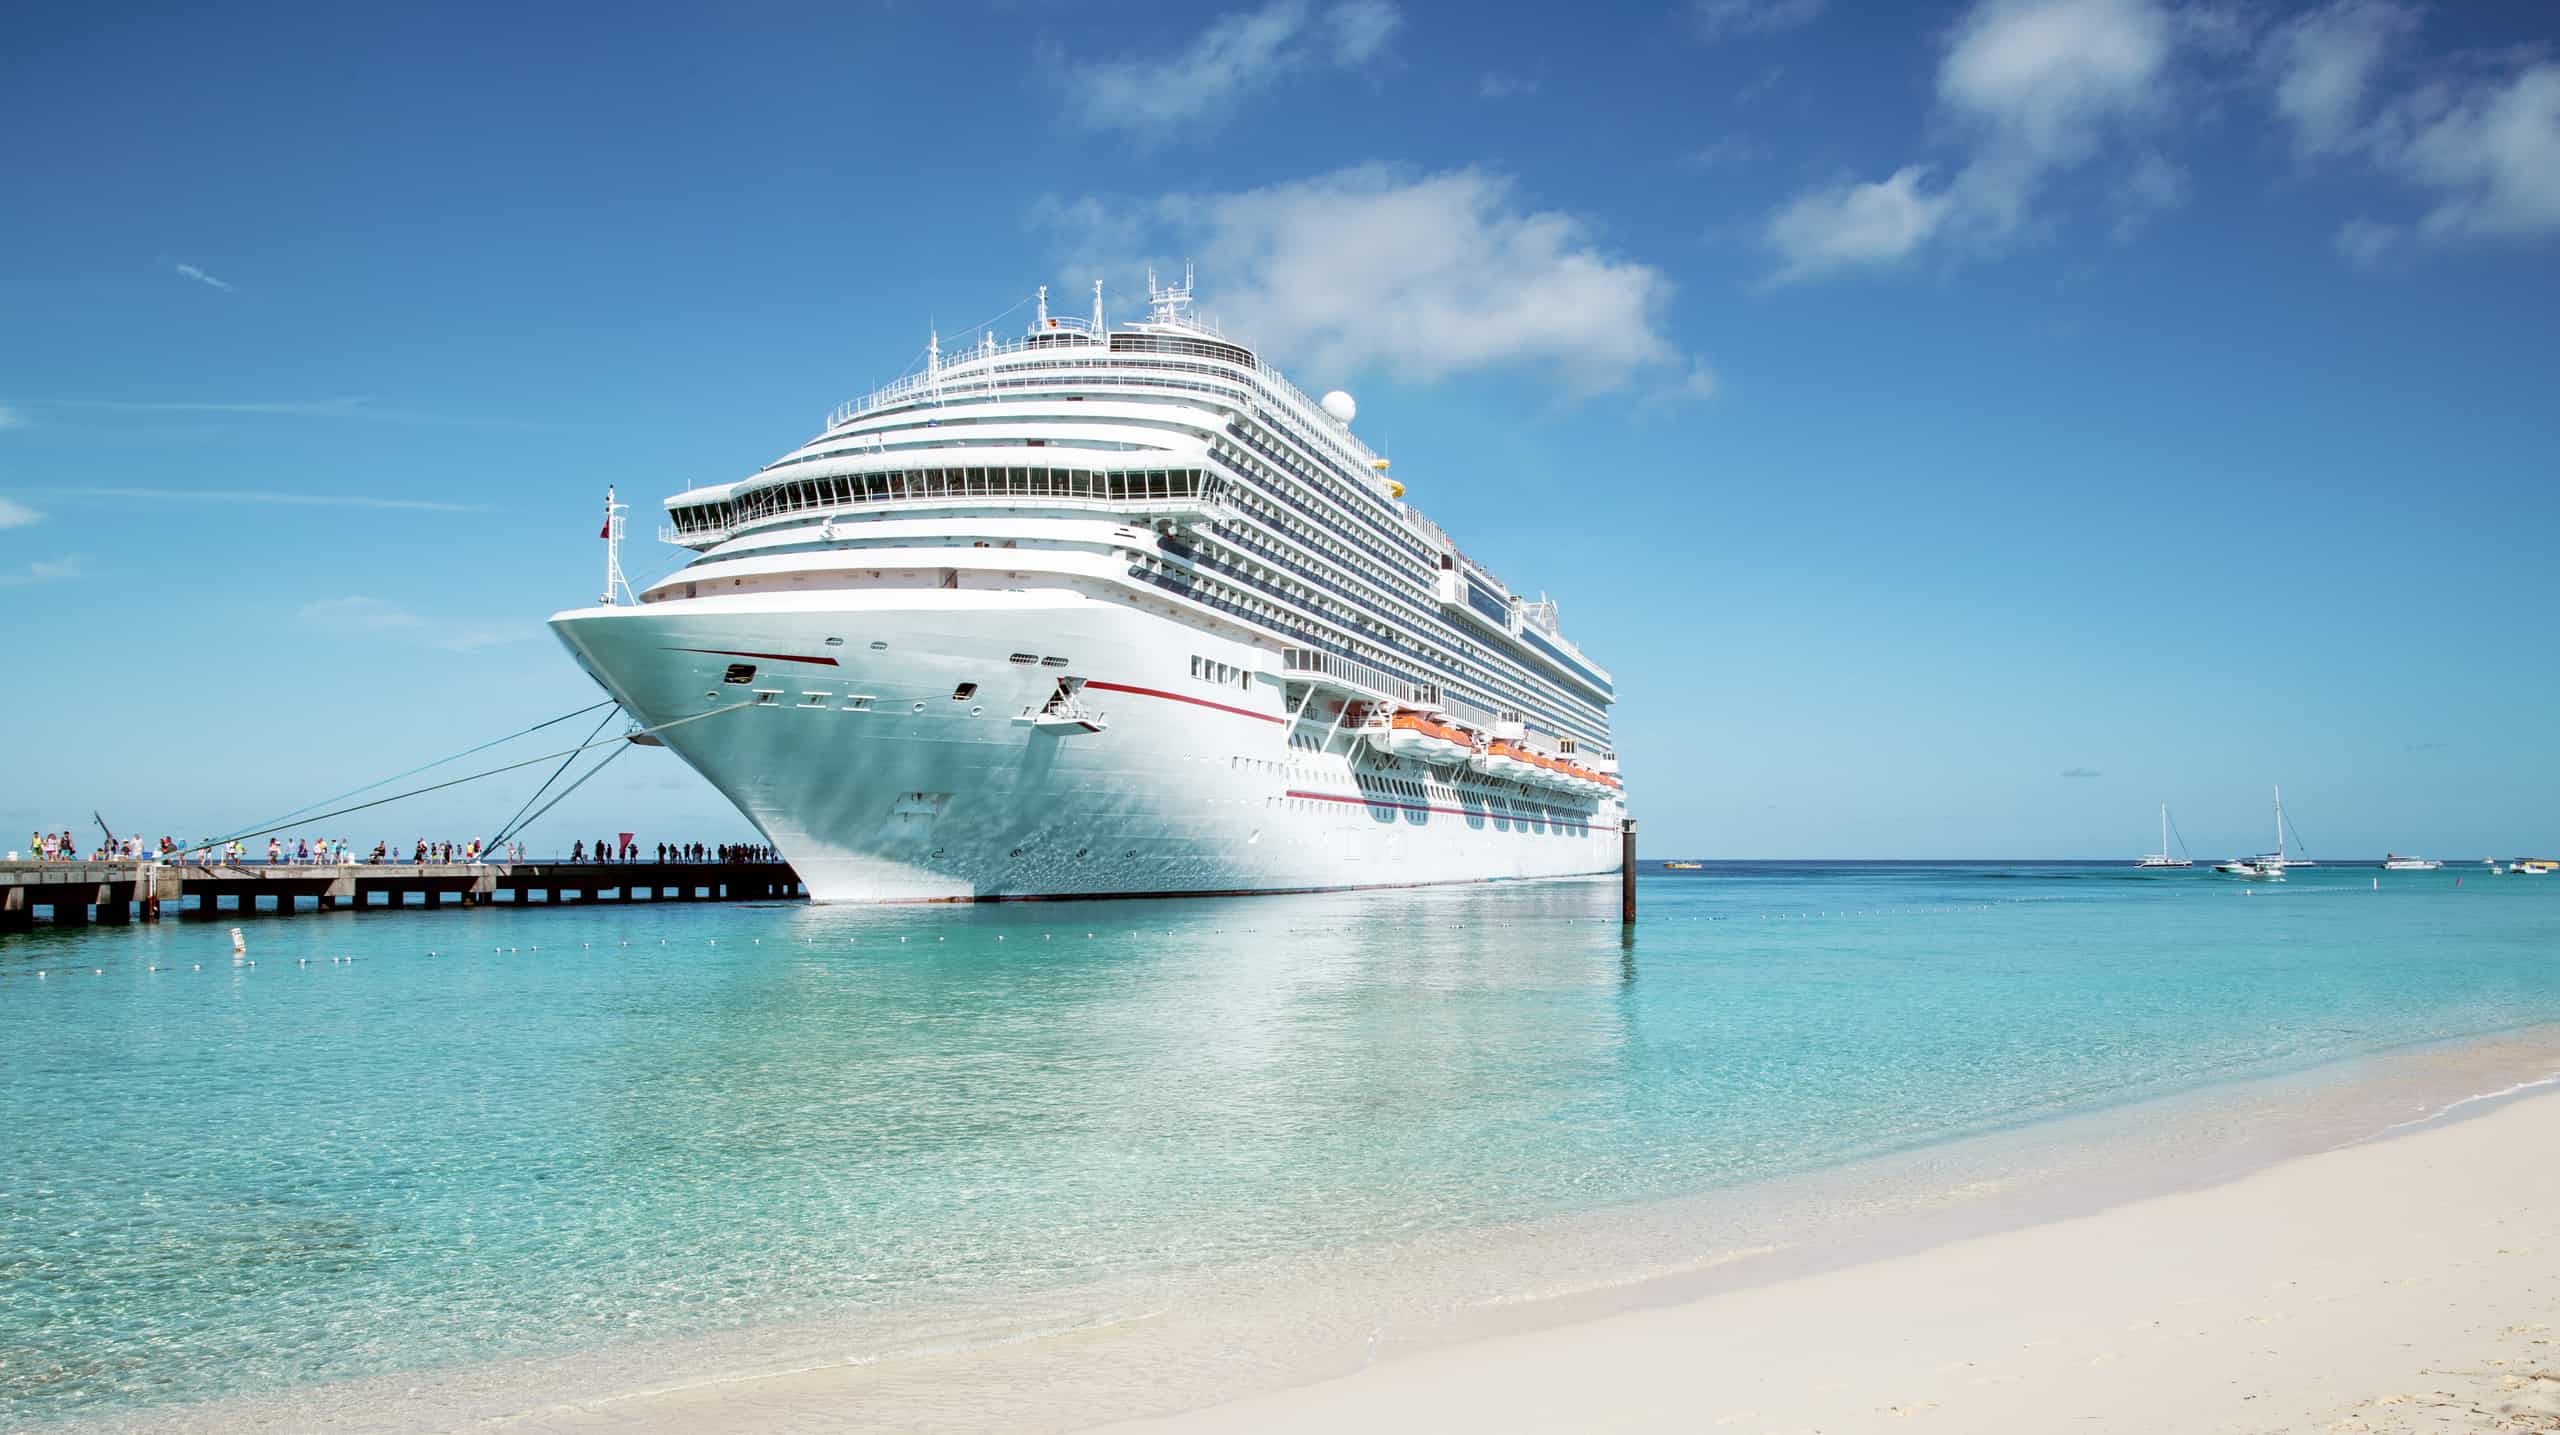 Cruise ship at dock of gorgeous beach with people boarding